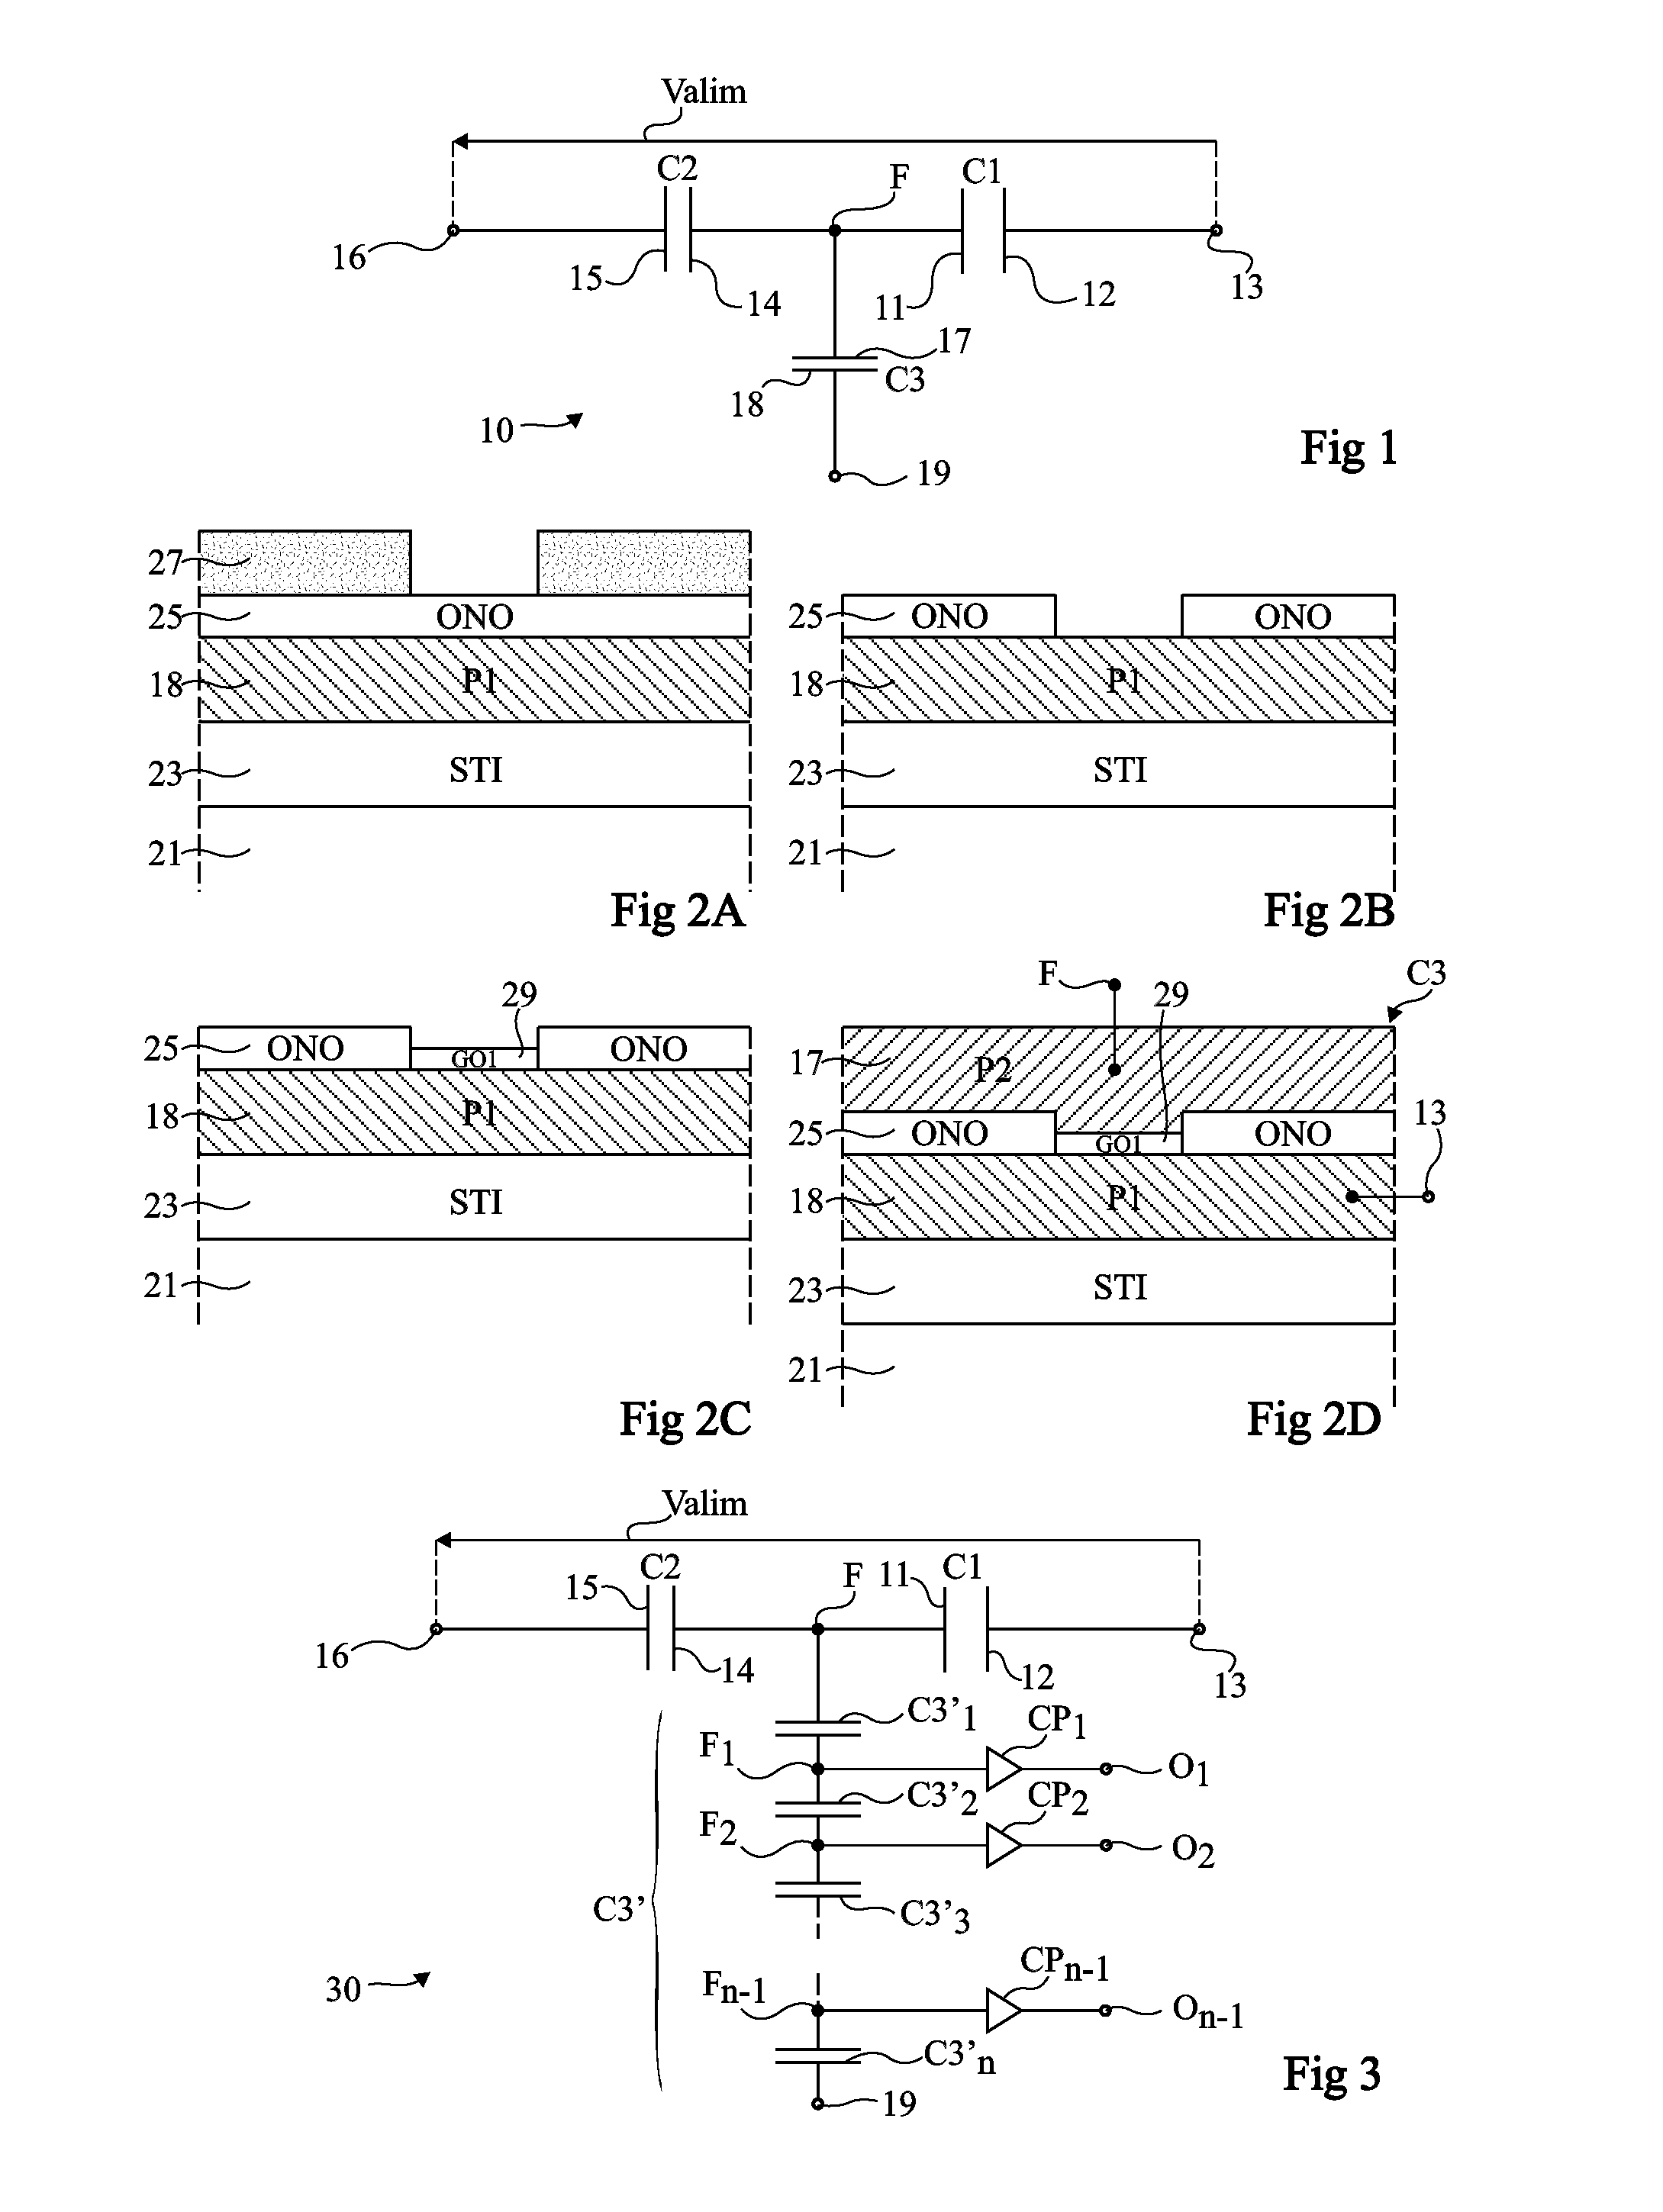 Electric charge flow circuit for a time measurement